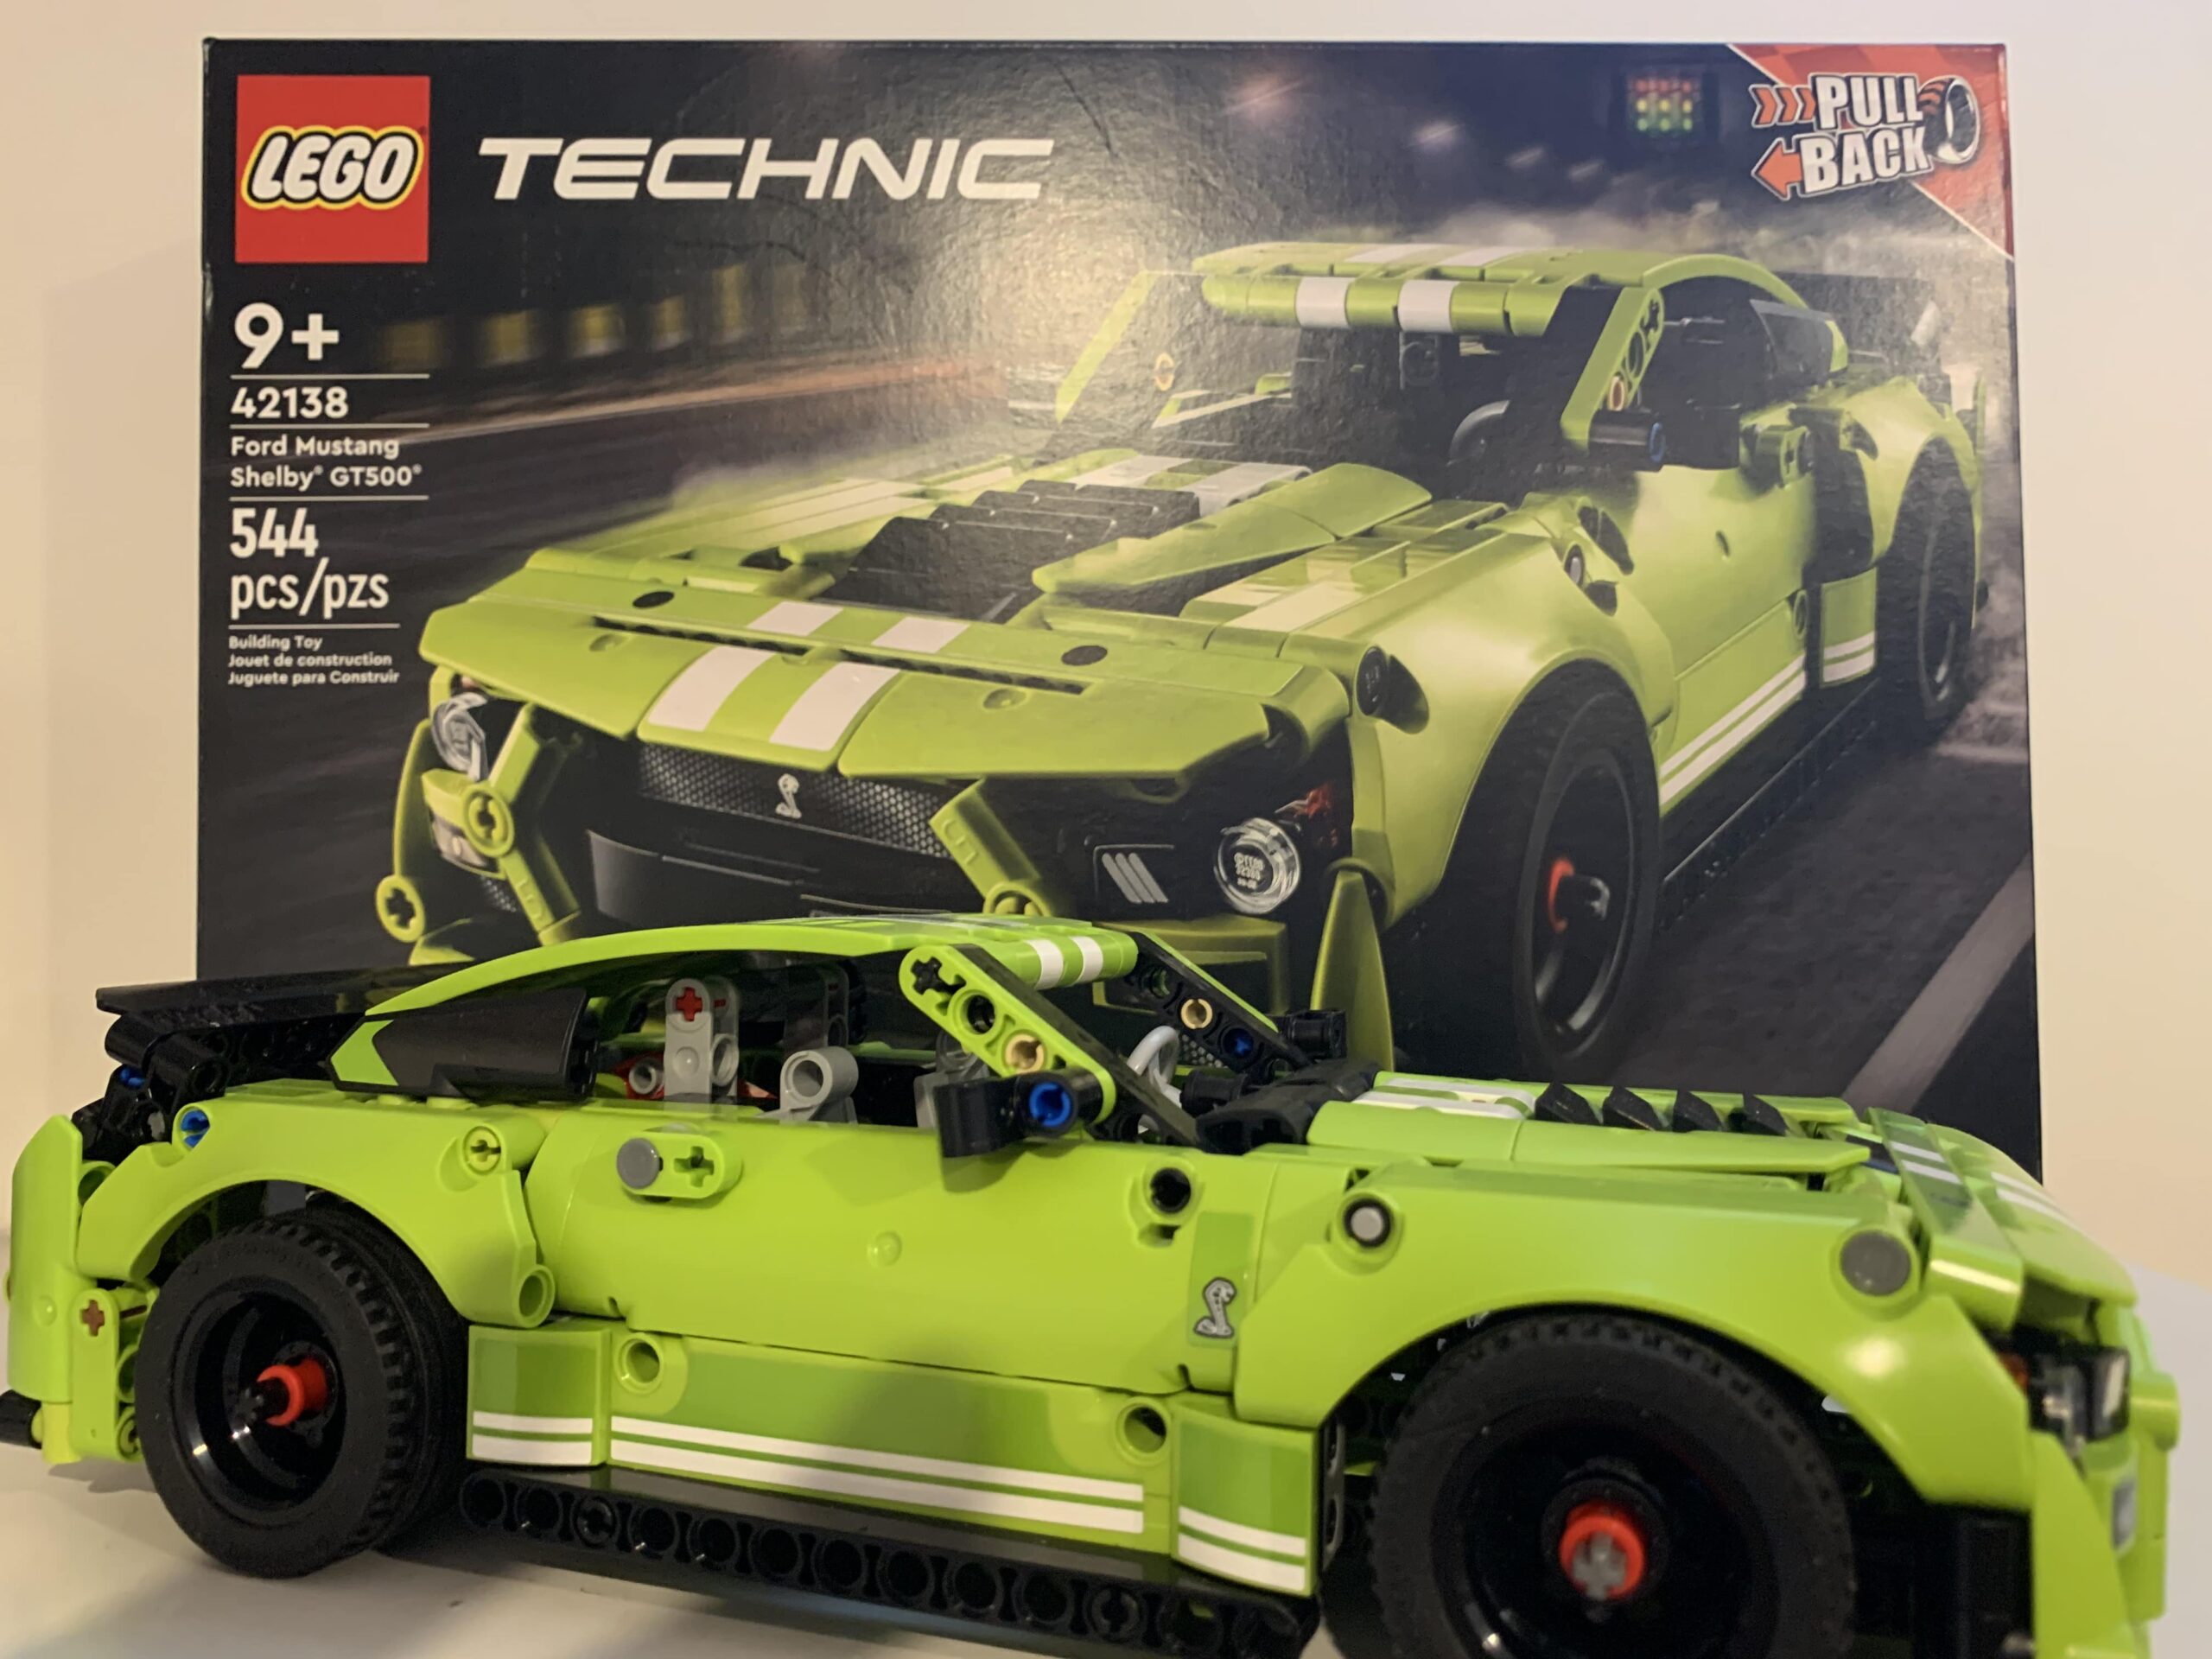 42138 LEGO® TECHNIC Ford Mustang Shelby GT500 - Conrad Electronic France